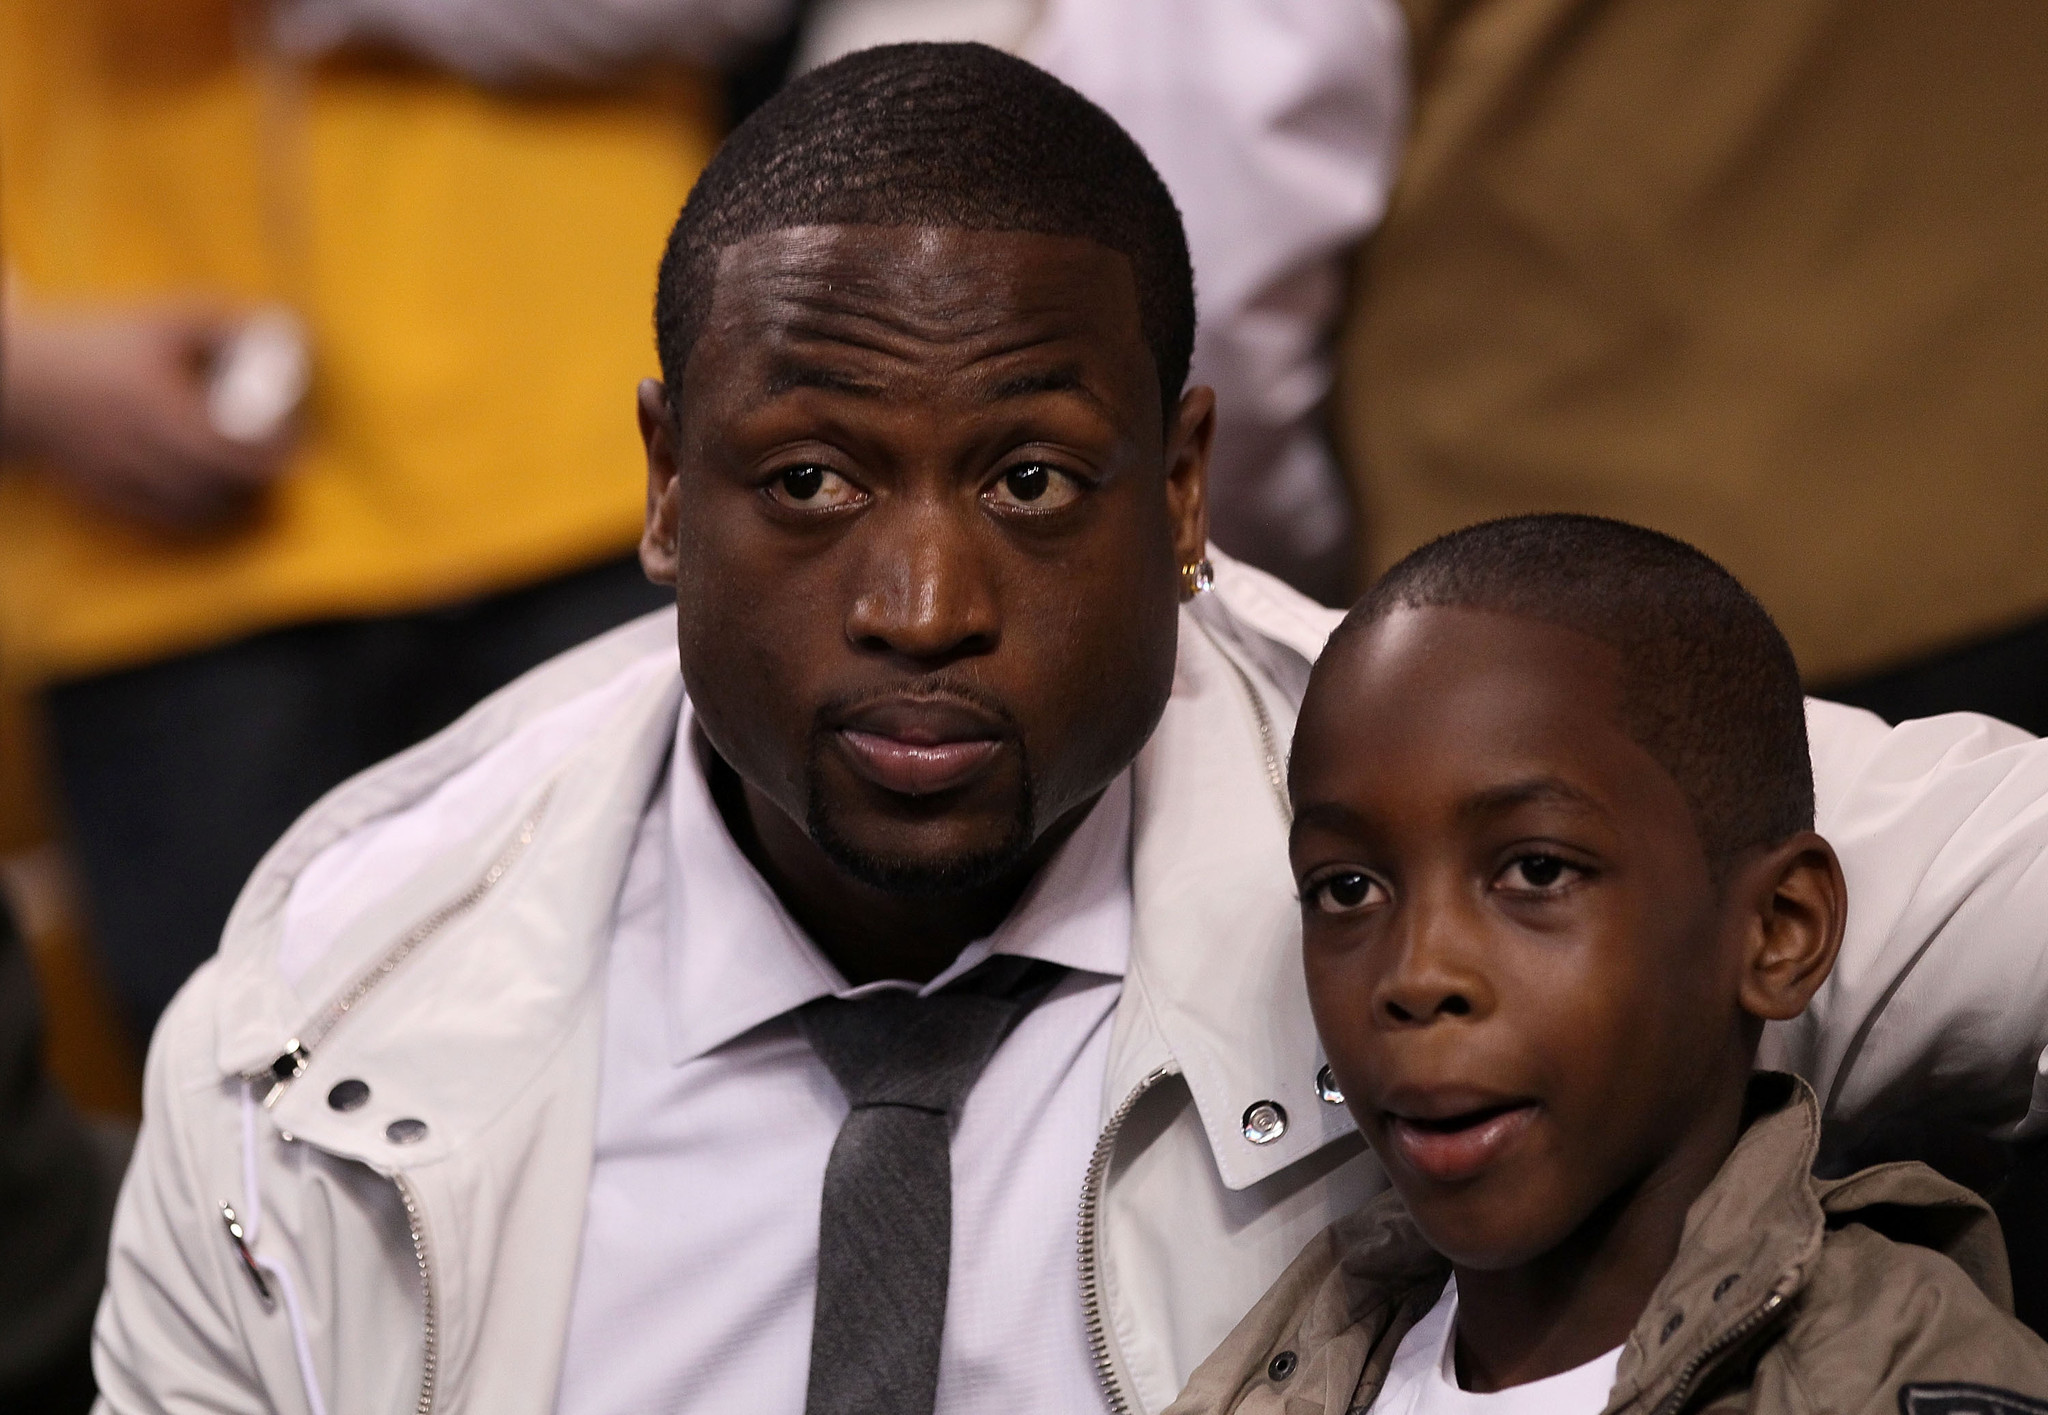 Dwyane Wade's son: After best game vs. Bulls, 'stay on attack mode big dog' - Chicago ...